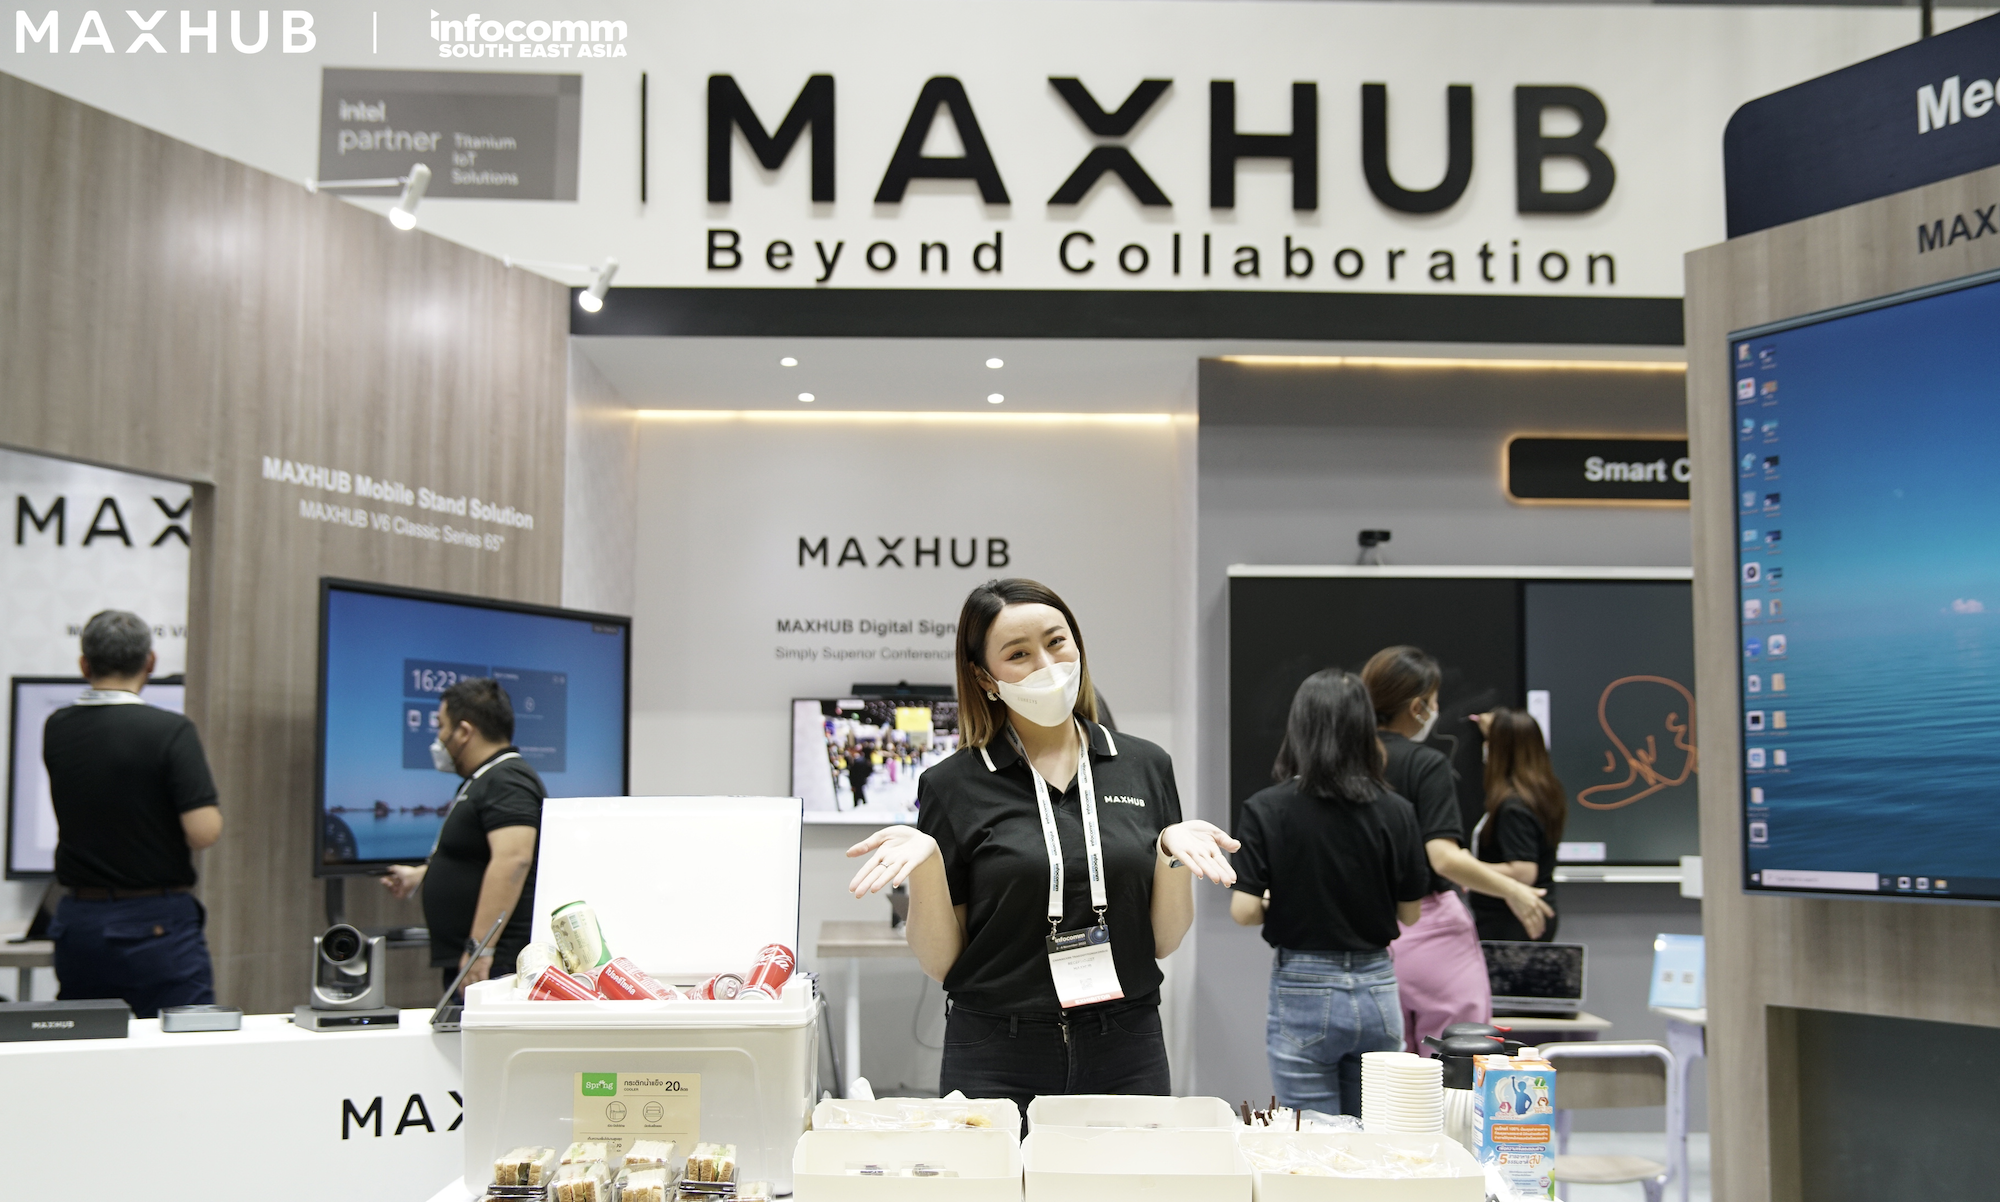 MAXHUB Showcases High-End Collaboration Technologies at InfoComm Southeast Asia 2022